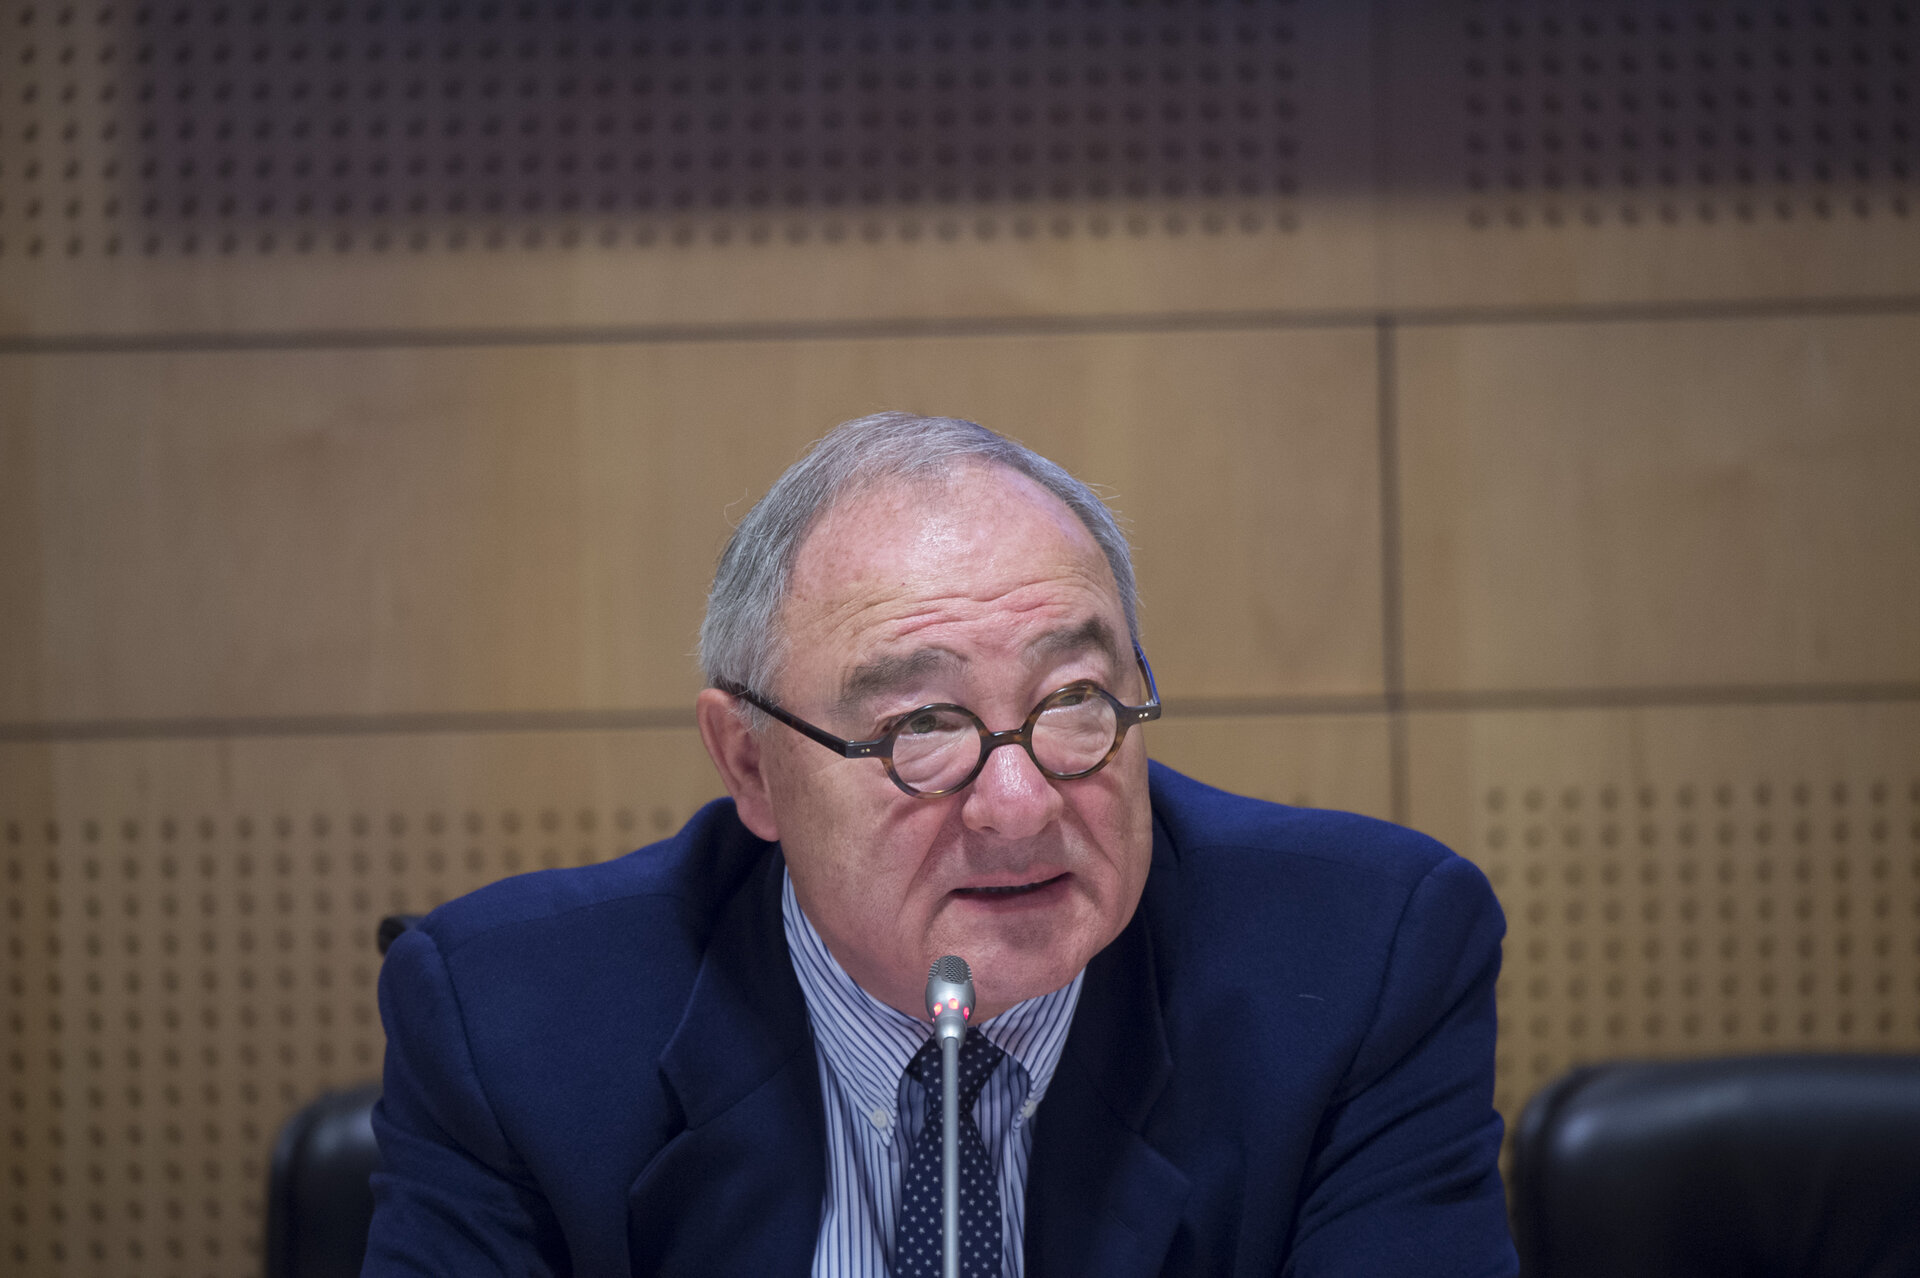 Jean-Jacques Dordain during the annual press briefing on 16 January 2015